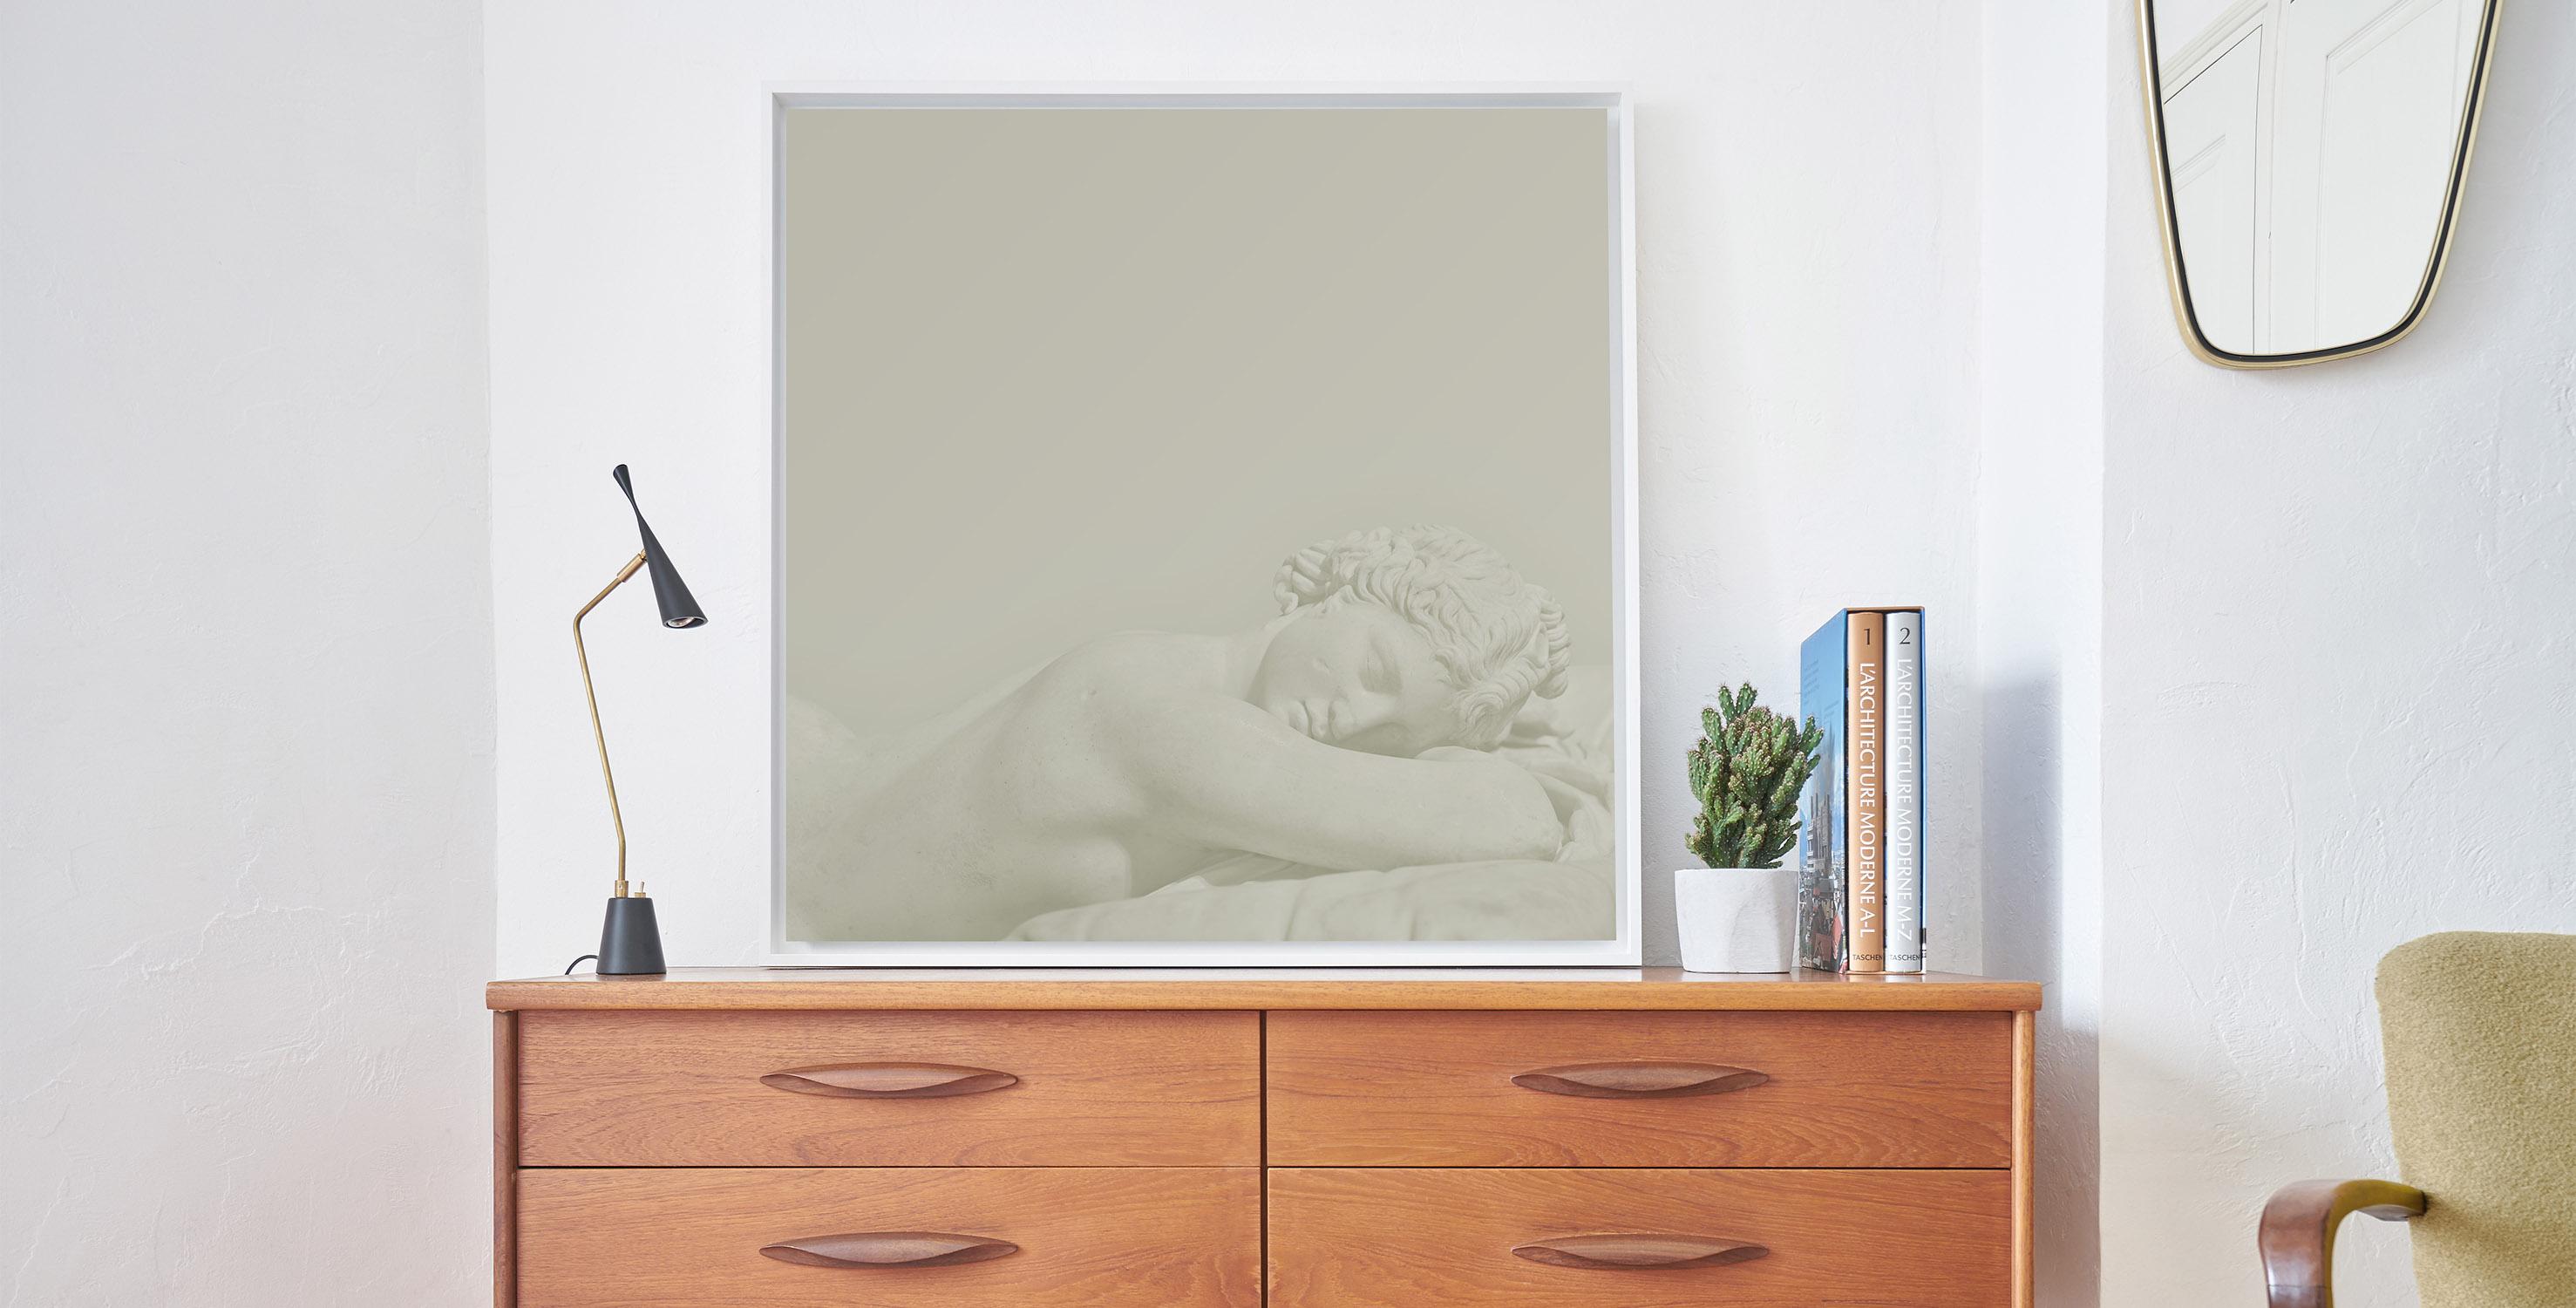 Room 30, the Conciergerie of vintage furniture, is publishing its first collection of limited-edition photos: Iconic Beauty.
Iconic Beauty is a series of 17 photos in limited editions of 17 copies per photo and offered in 3 formats.
The photo series